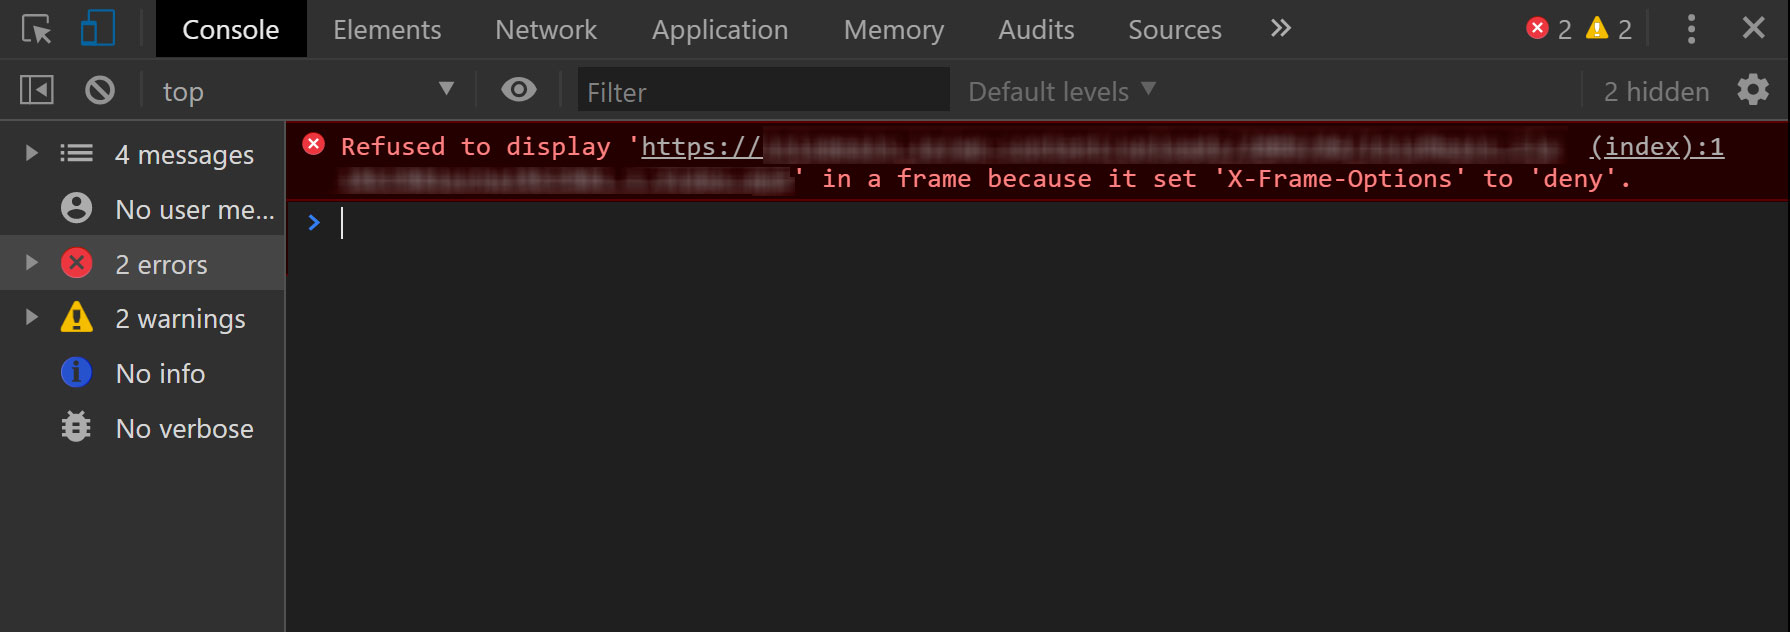 Nginx Problem: Refused to display 'URL' in a frame because it set 'X-Frame-Options' to 'deny'